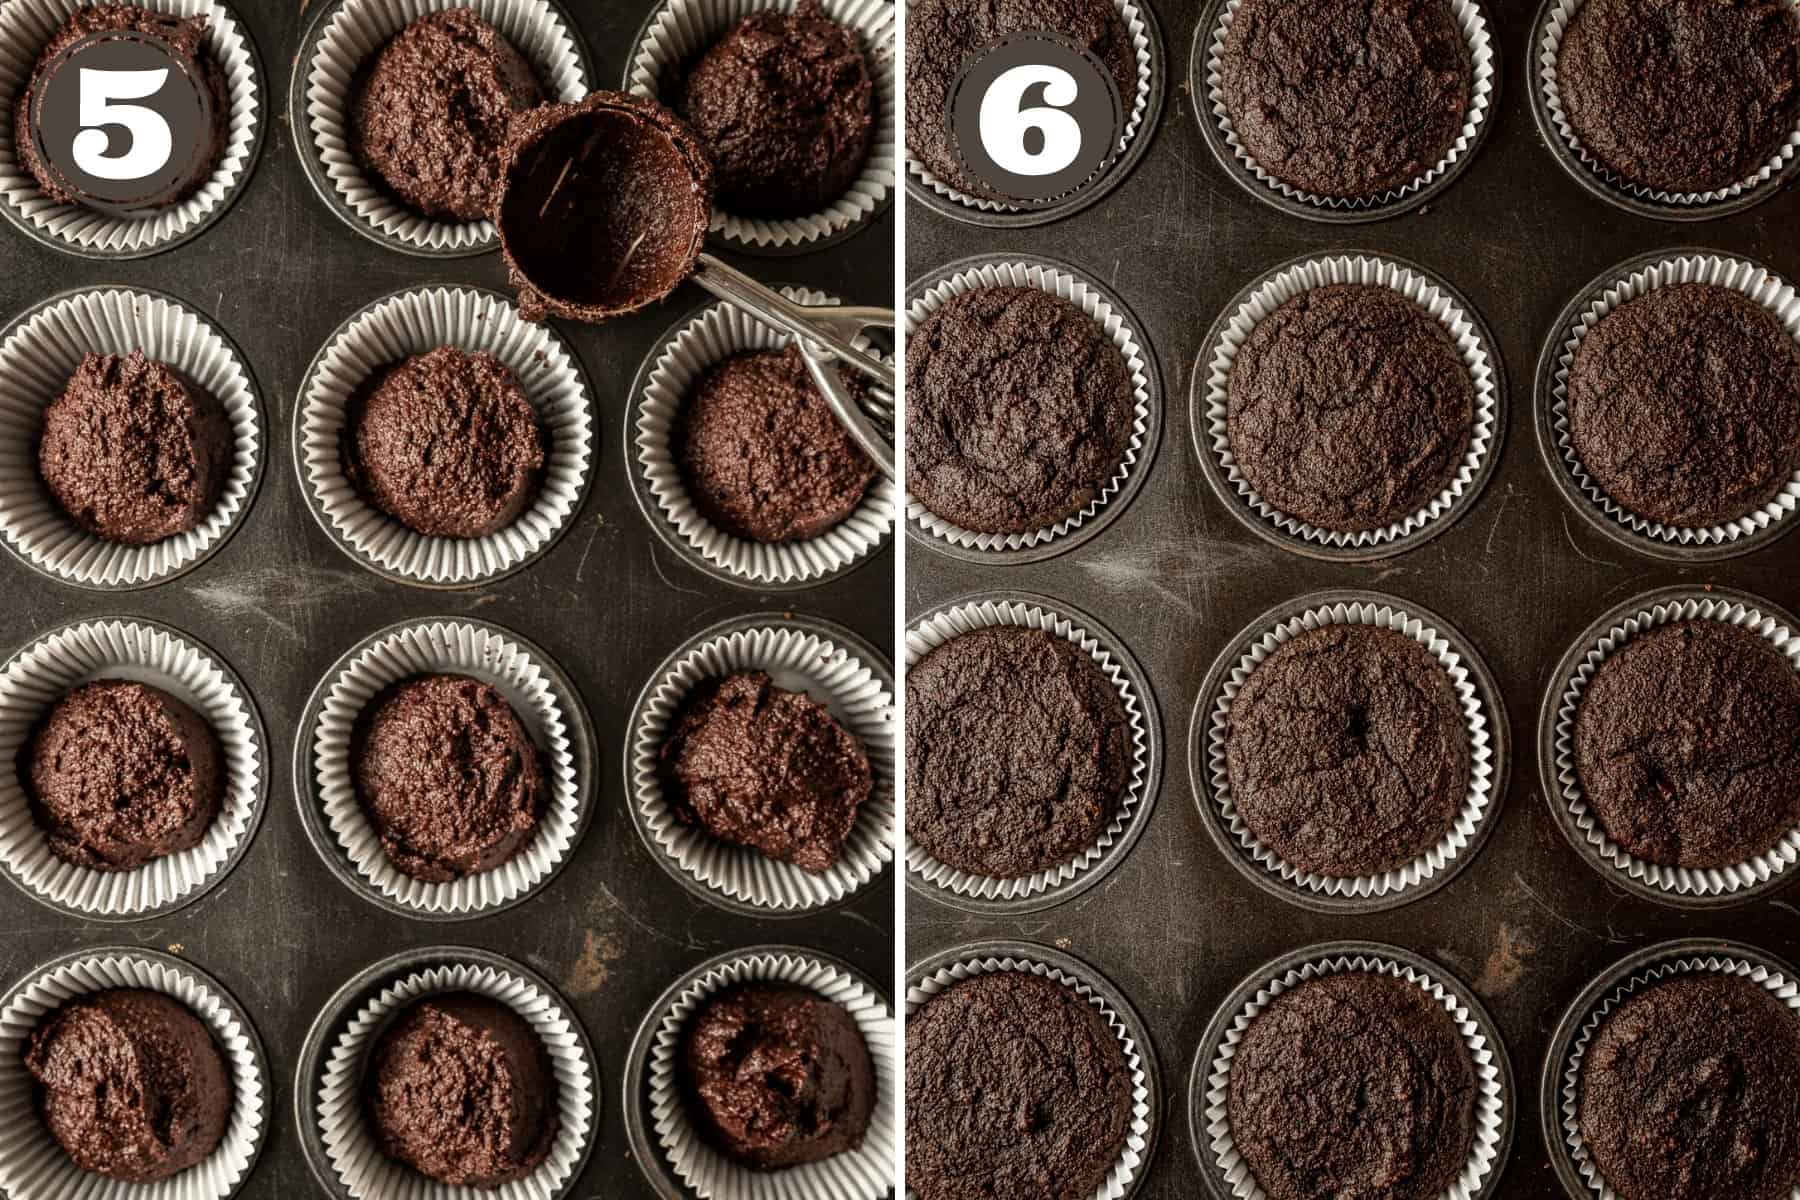 Side by side photos showing a cupcake pan with chocolate batter before baking and after baking.